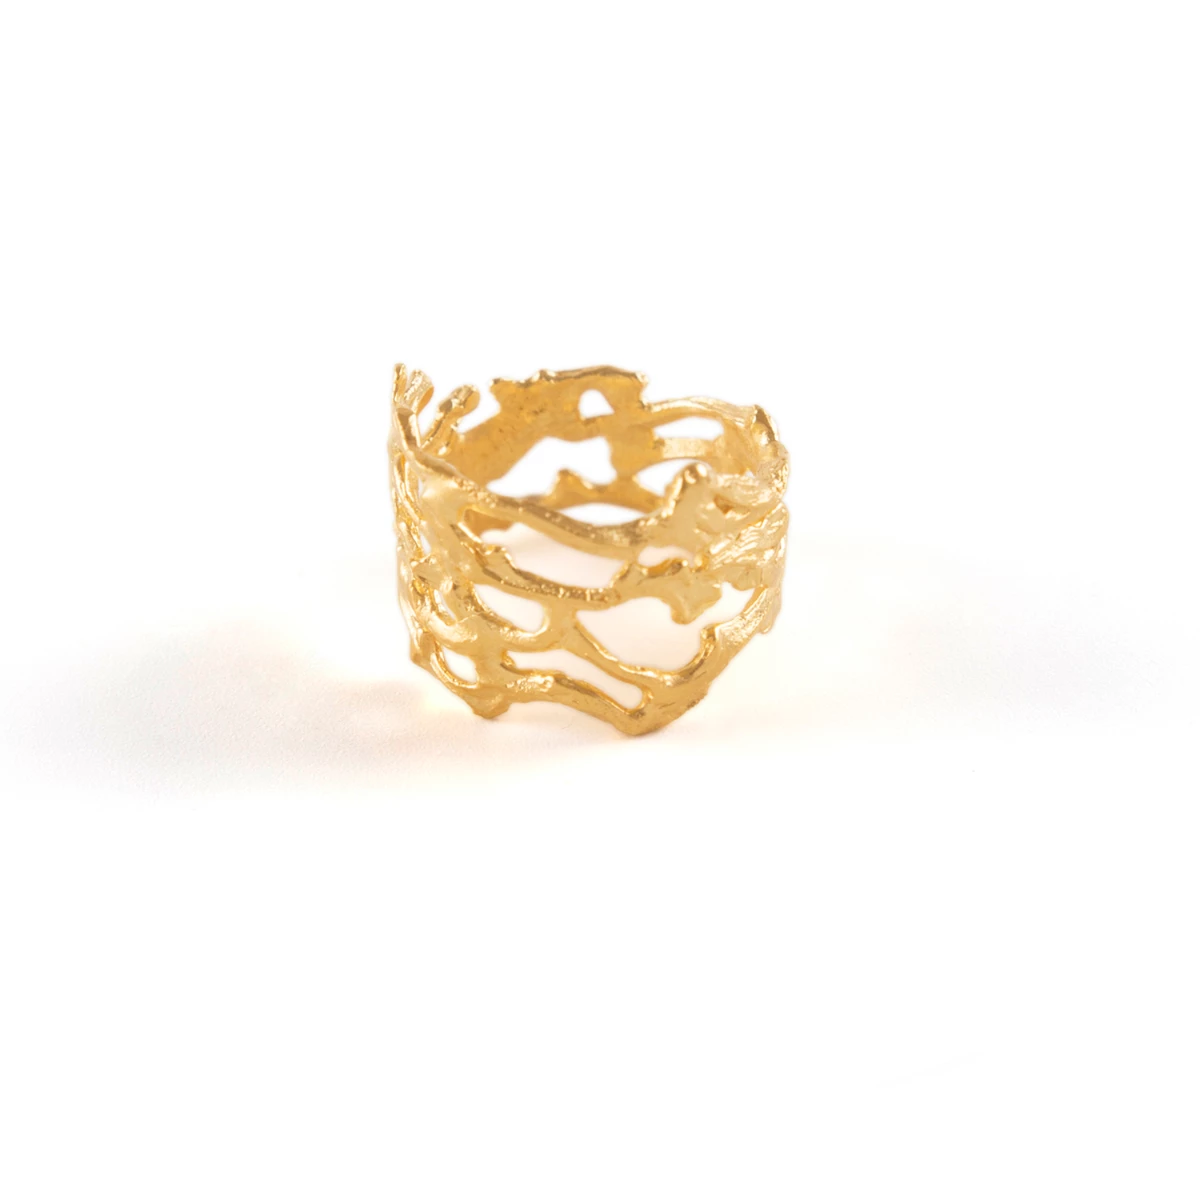 Ether Gold Ring I
